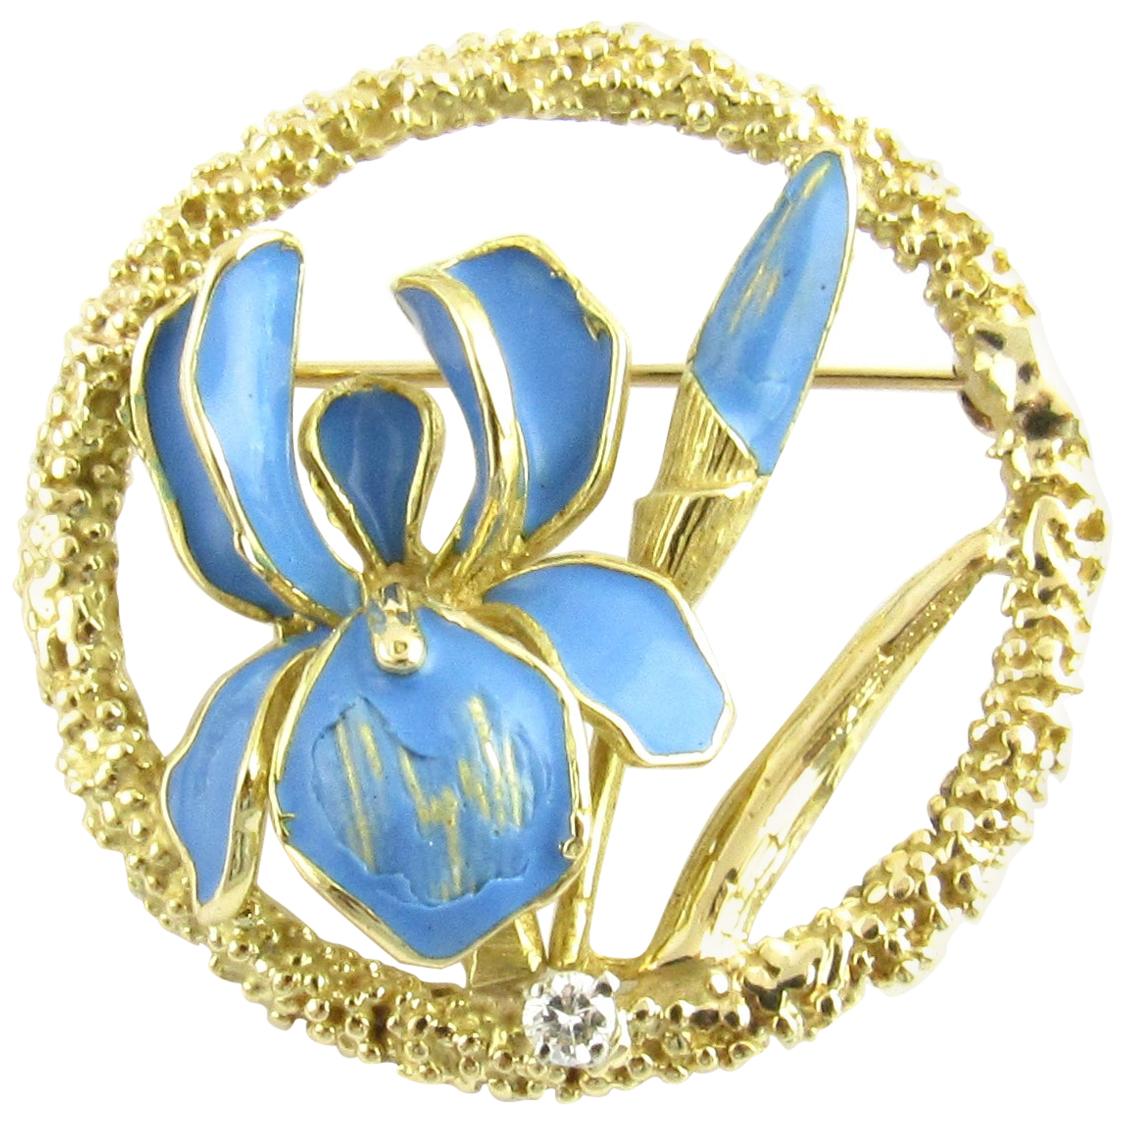 18 Karat Yellow Gold and Blue Enamel Floral Brooch or Pin